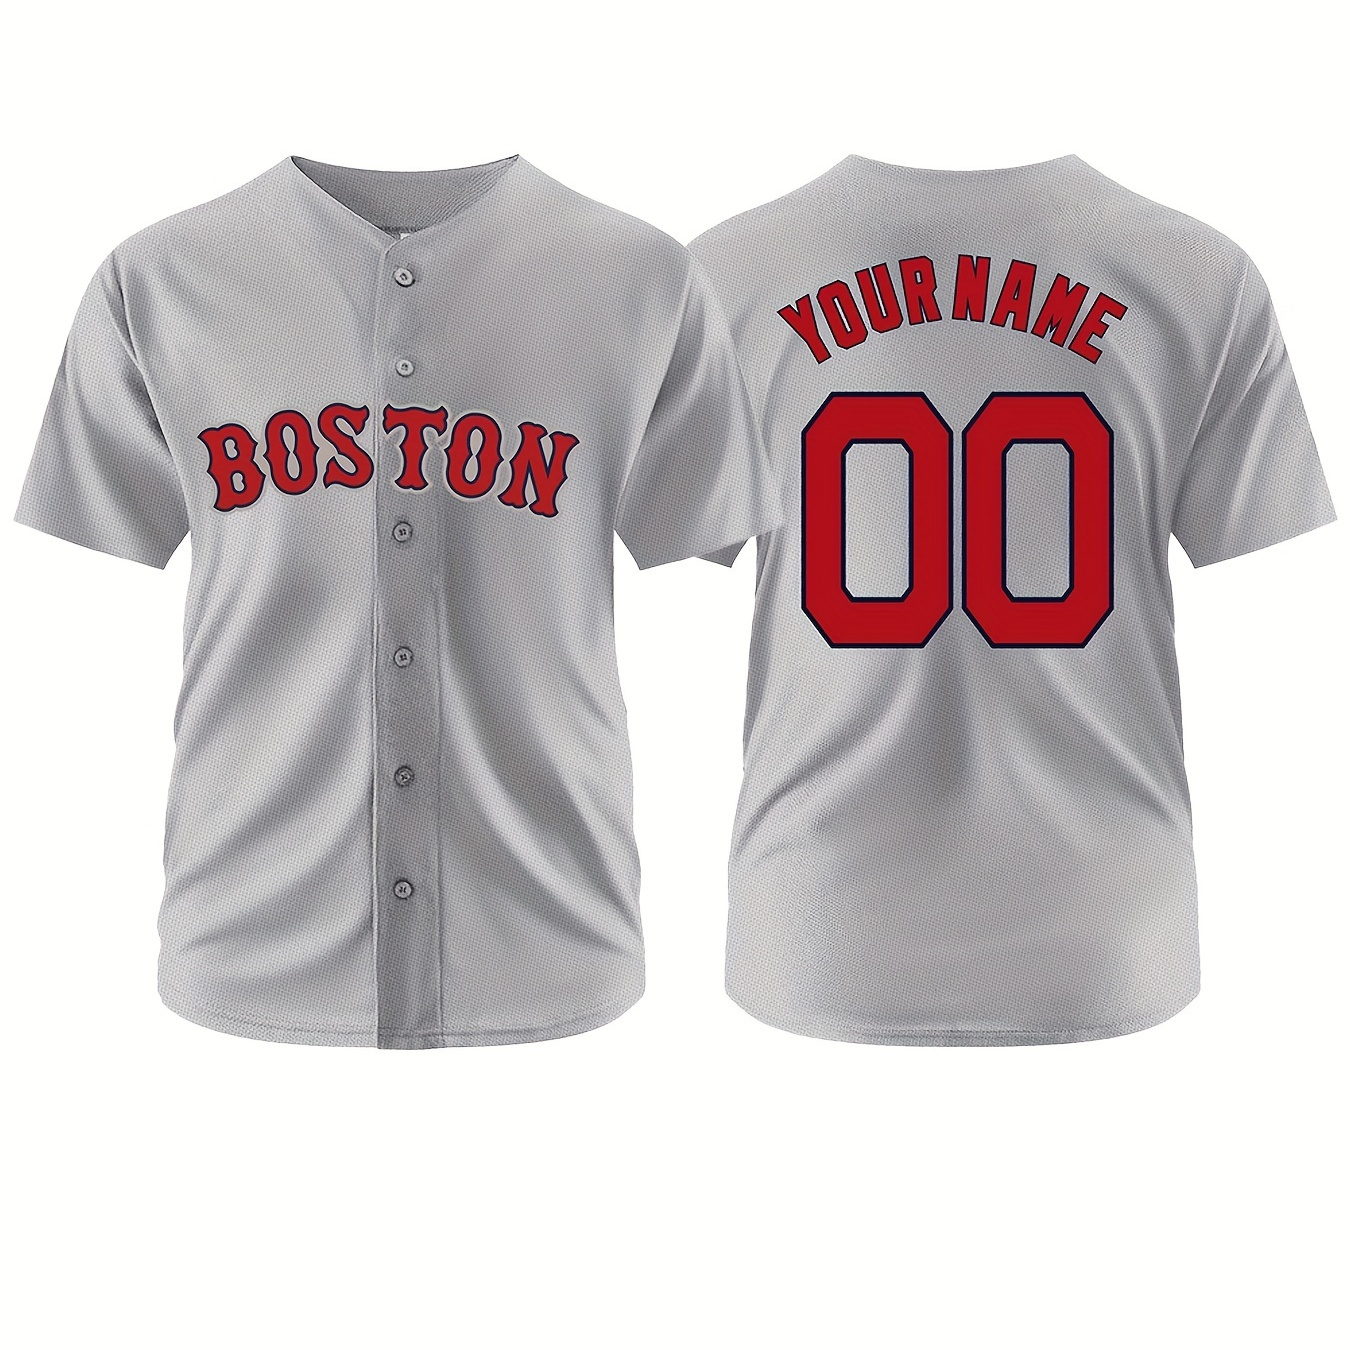 

Customizable Name And Number Men's Baseball Jersey V-neck Embroidered Outdoor Leisure Sports Customization S-3xl